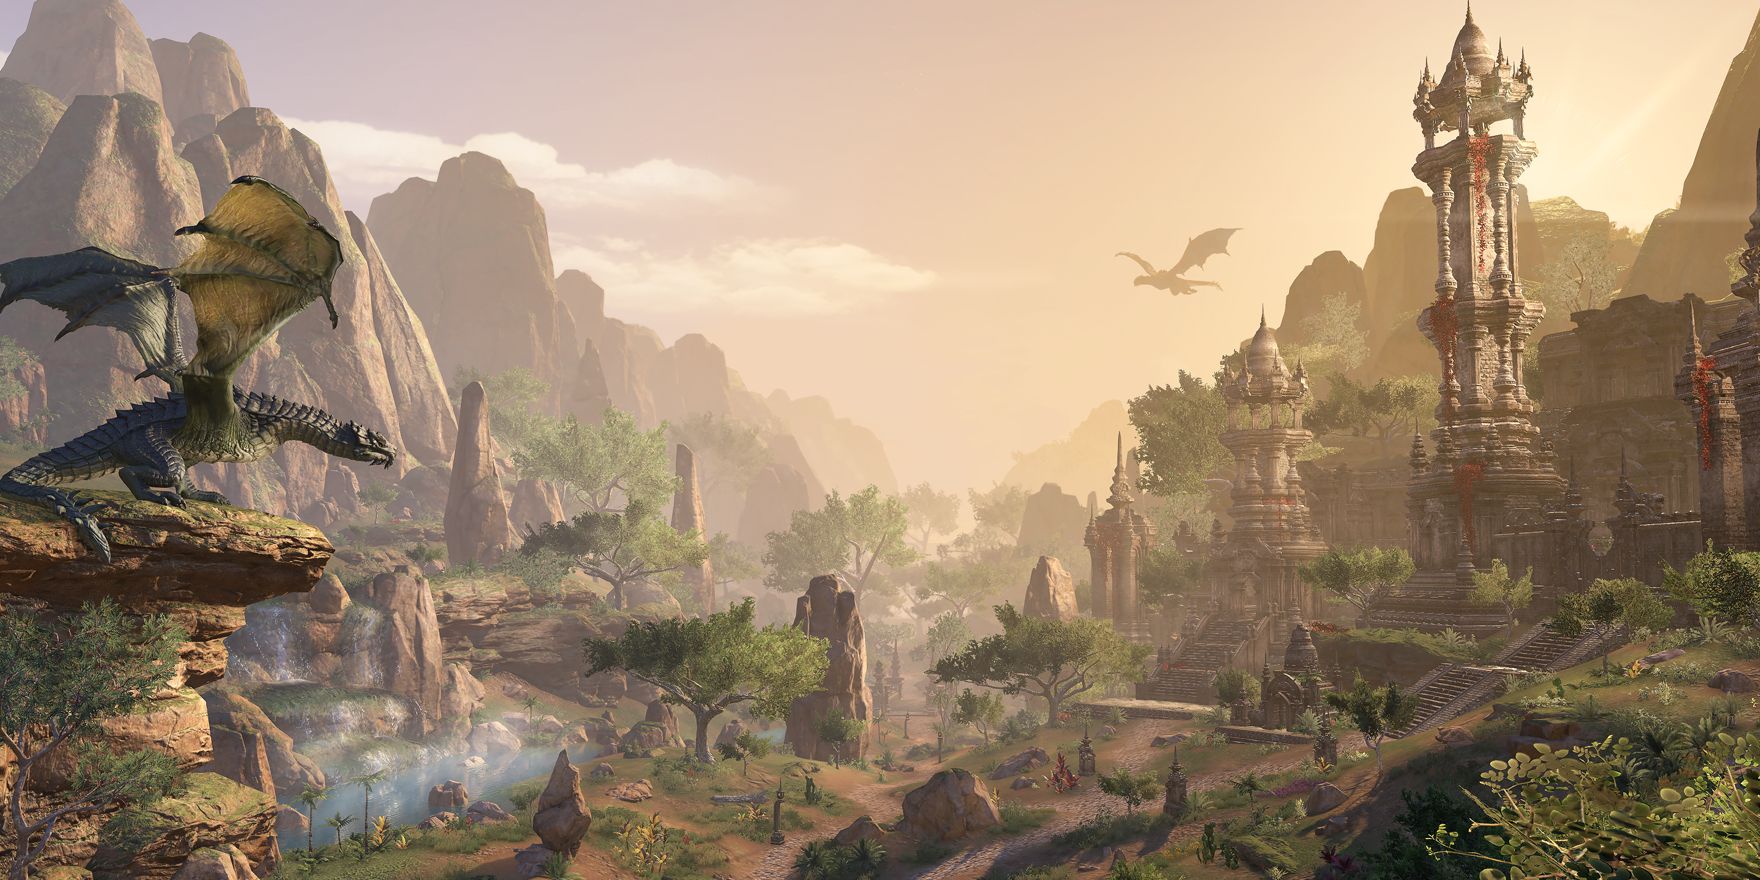 The Elder Scrolls 6 Guide: Everything We Know So Far